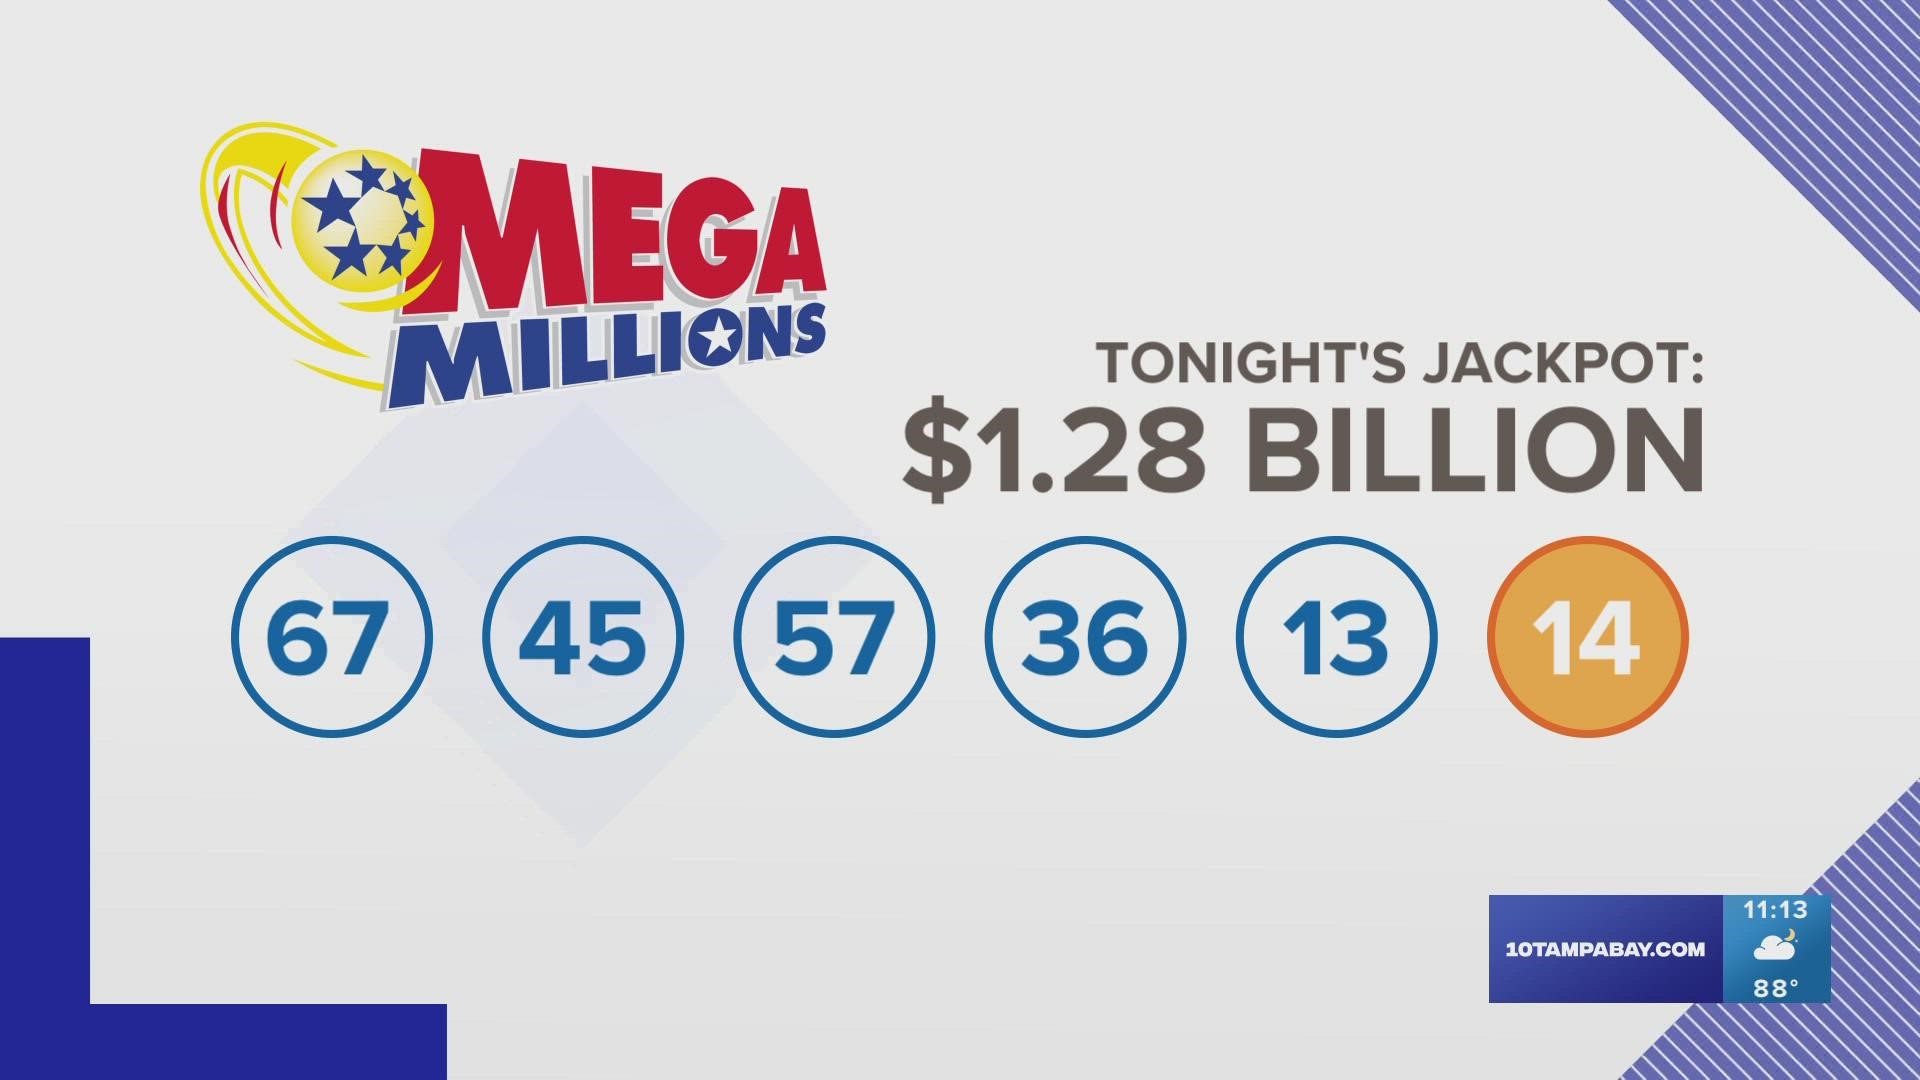 Hours before the Mega Millions drawing, the jackpot prize skyrocketed to $1.28 billion, the second largest lottery prize ever.